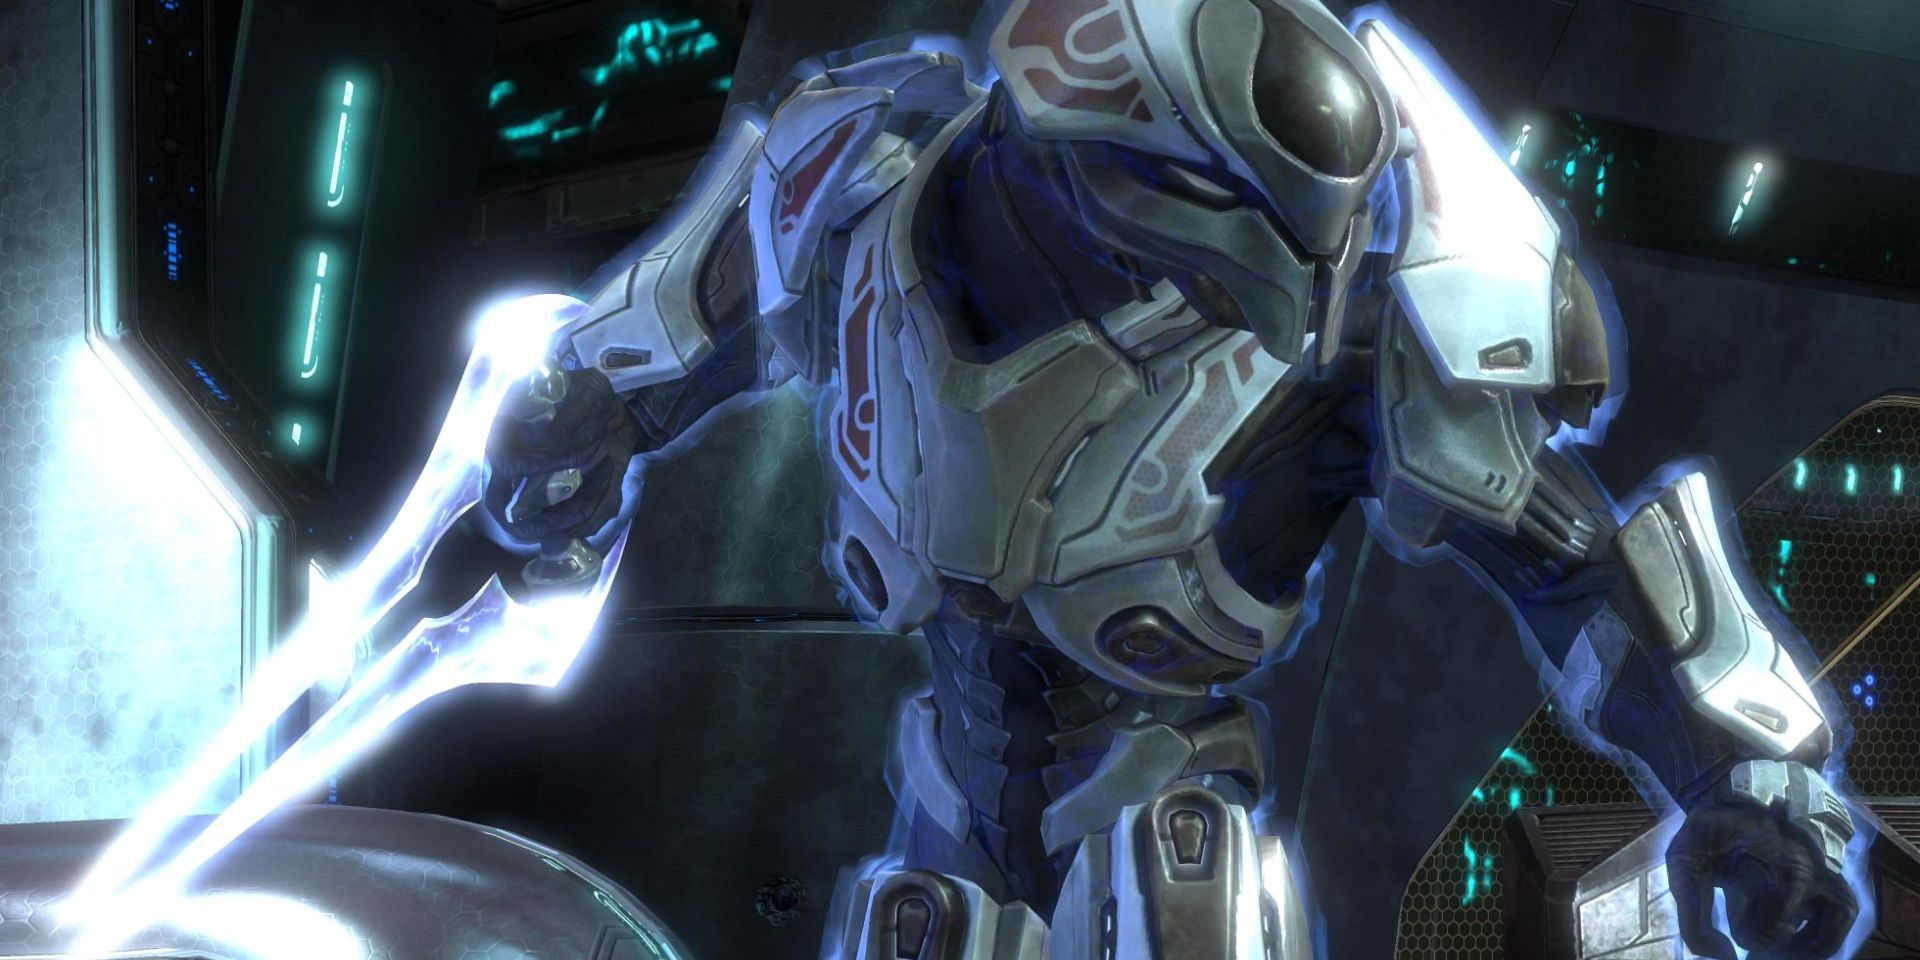 An elite holding an energy sword in Halo